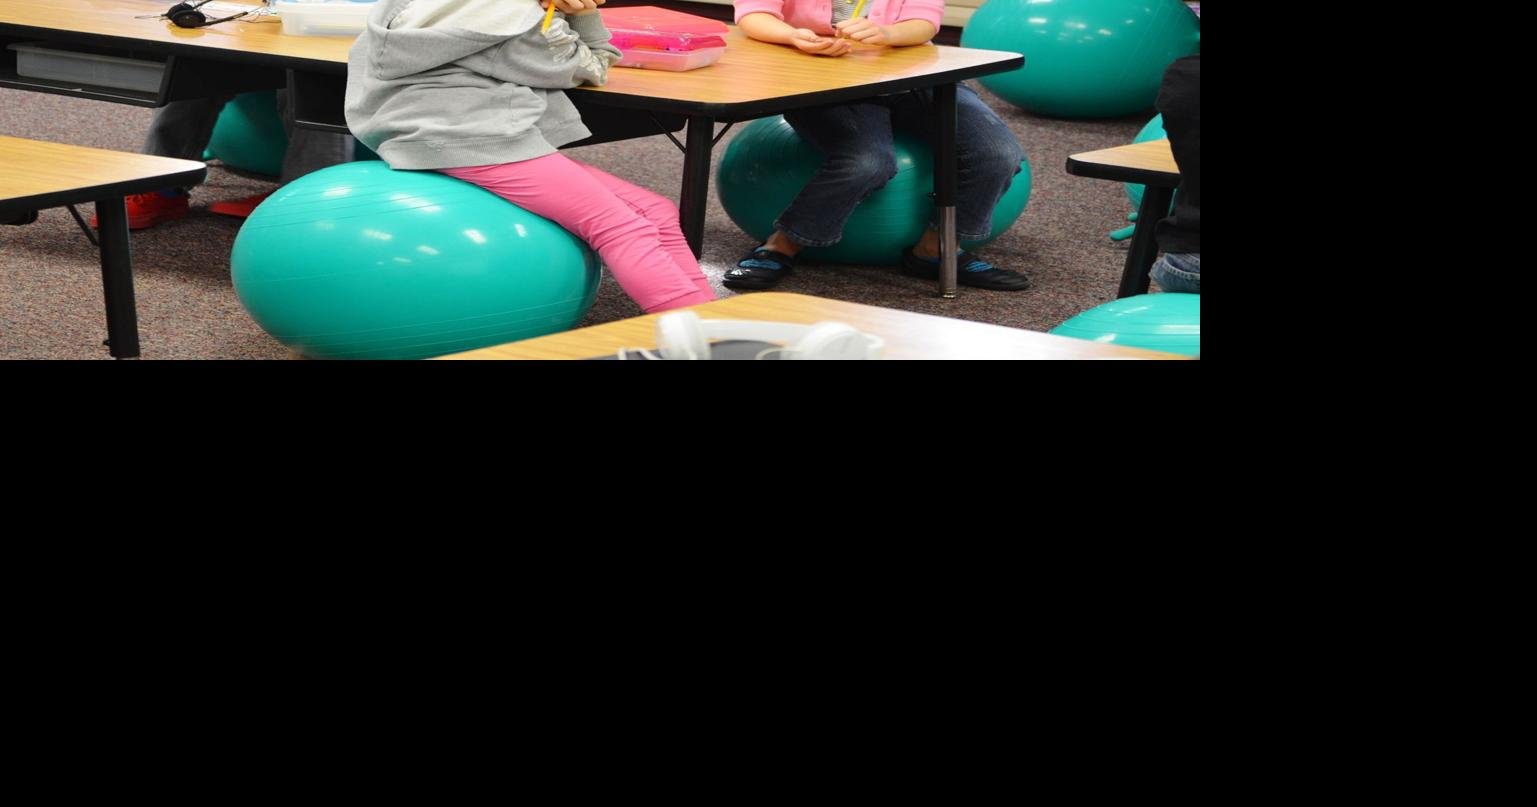 Kindergartners Have A Ball With Alternative Seating News